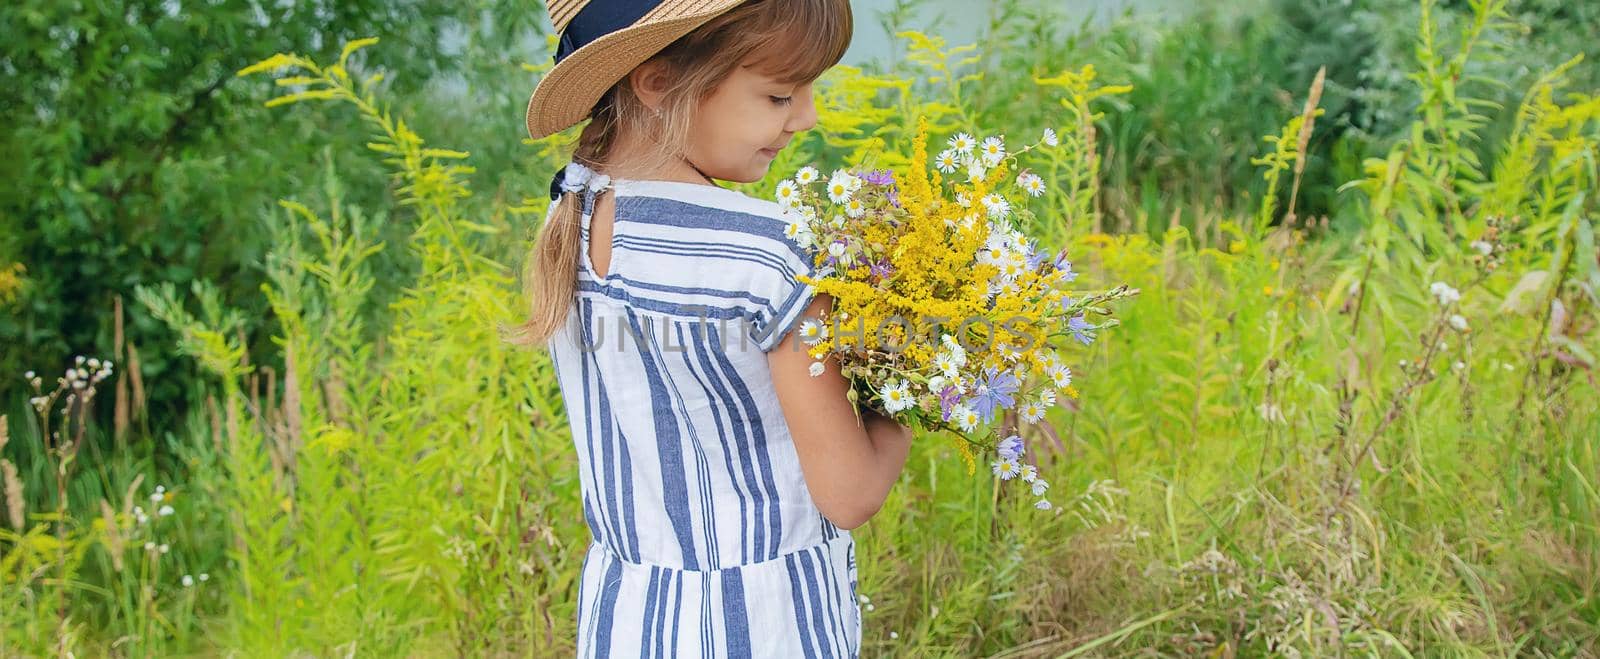 girl holding wildflowers in the hands of a child. Selective focus. by yanadjana